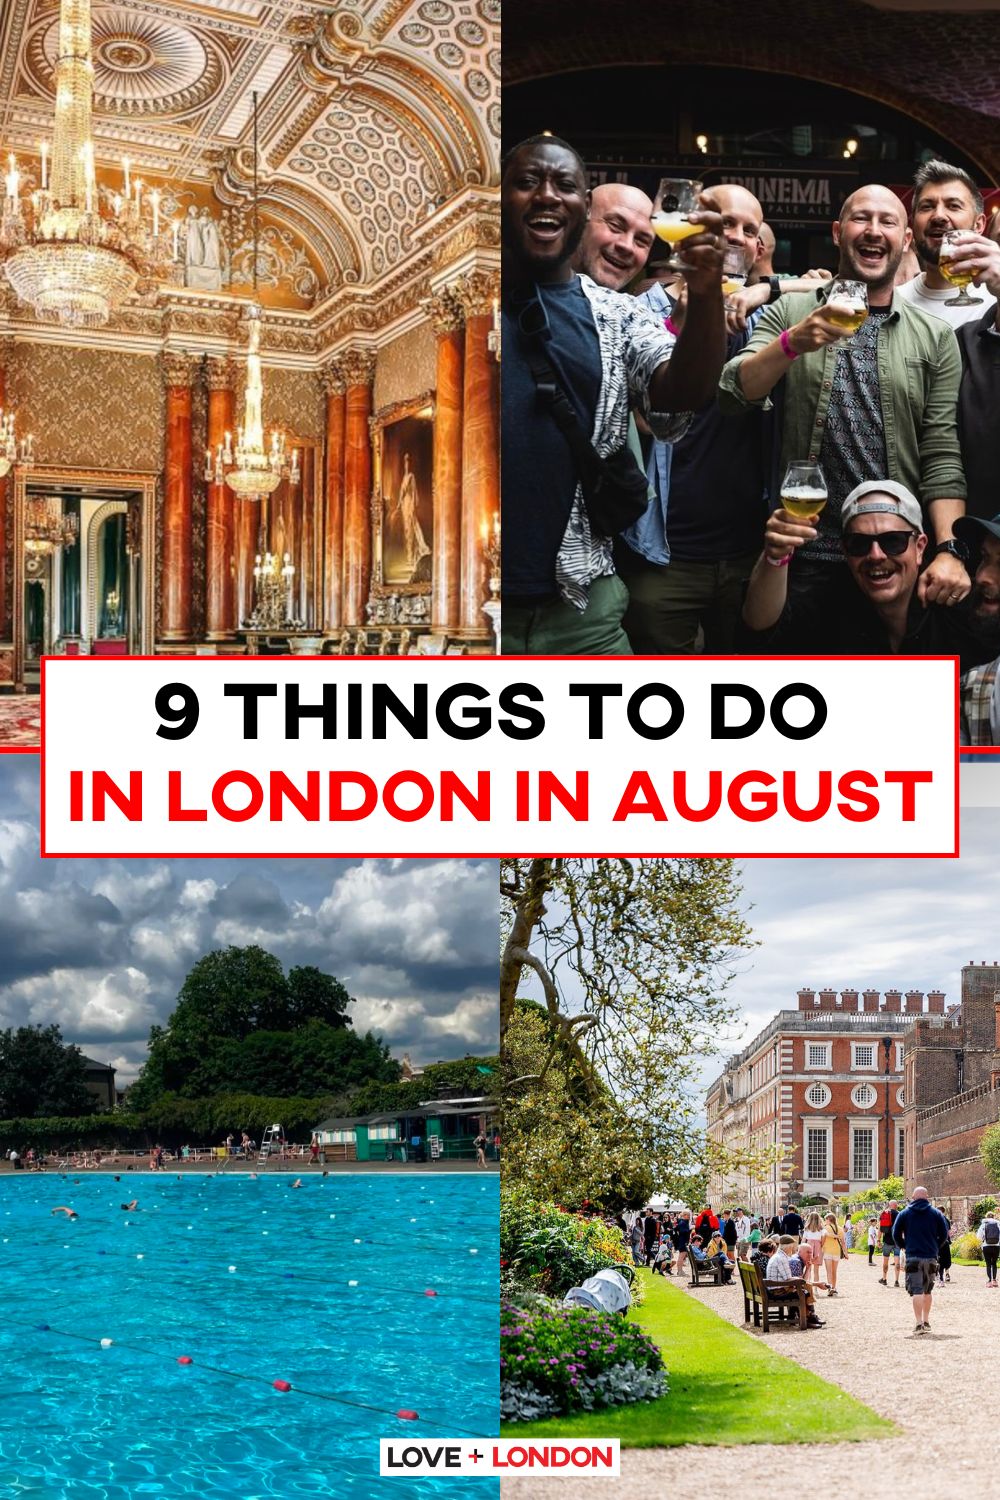 This is a Pinterest pin detailing the 9 Things To Do in London in August.